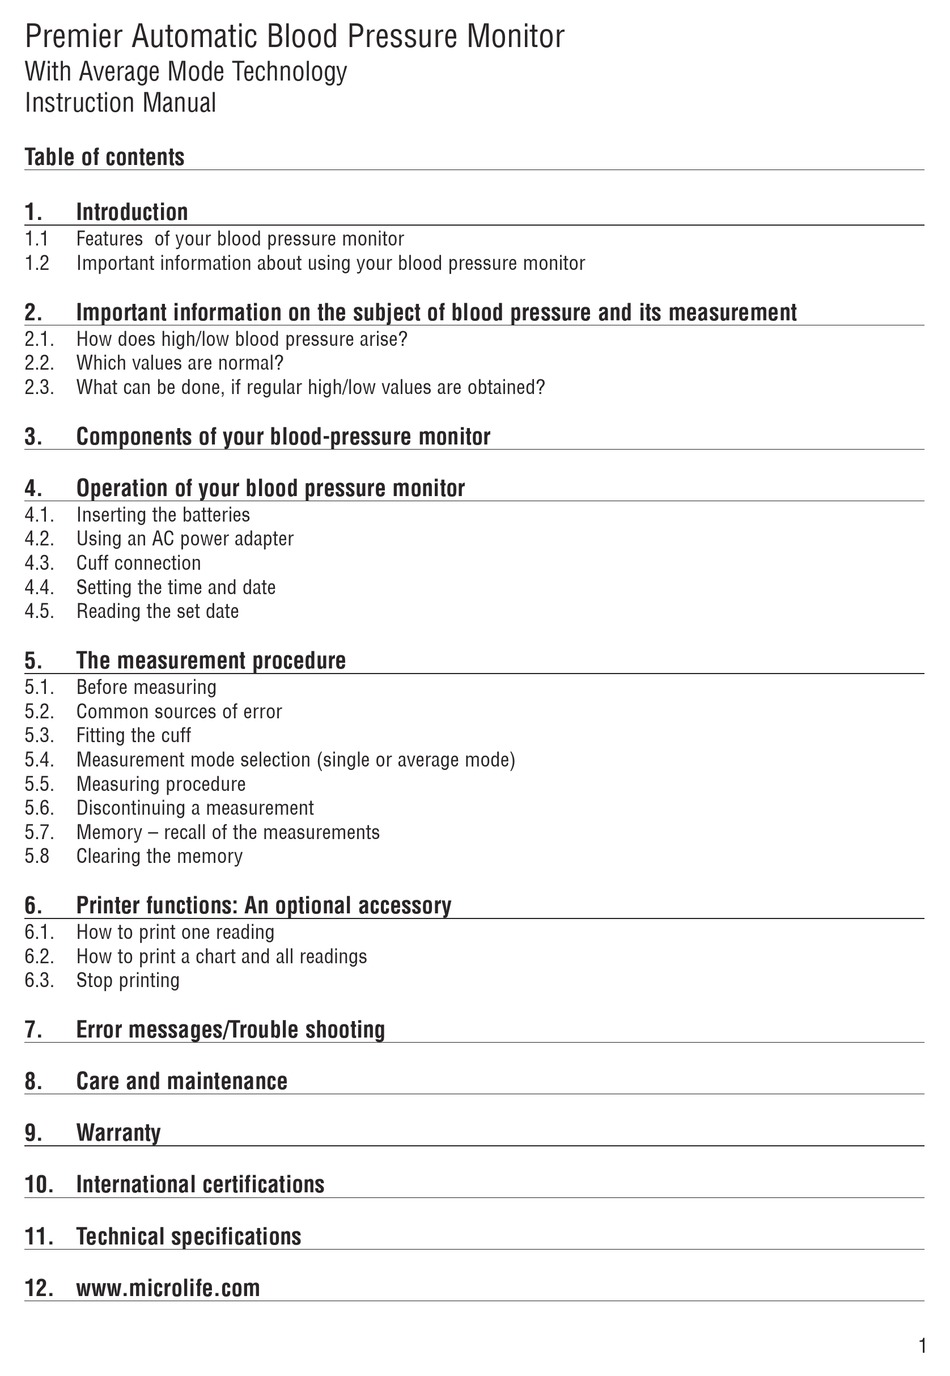 Error Messages/Troubleshooting - Premier Automatic Blood Pressure Monitor Instruction Manual [Page 12] | ManualsLib